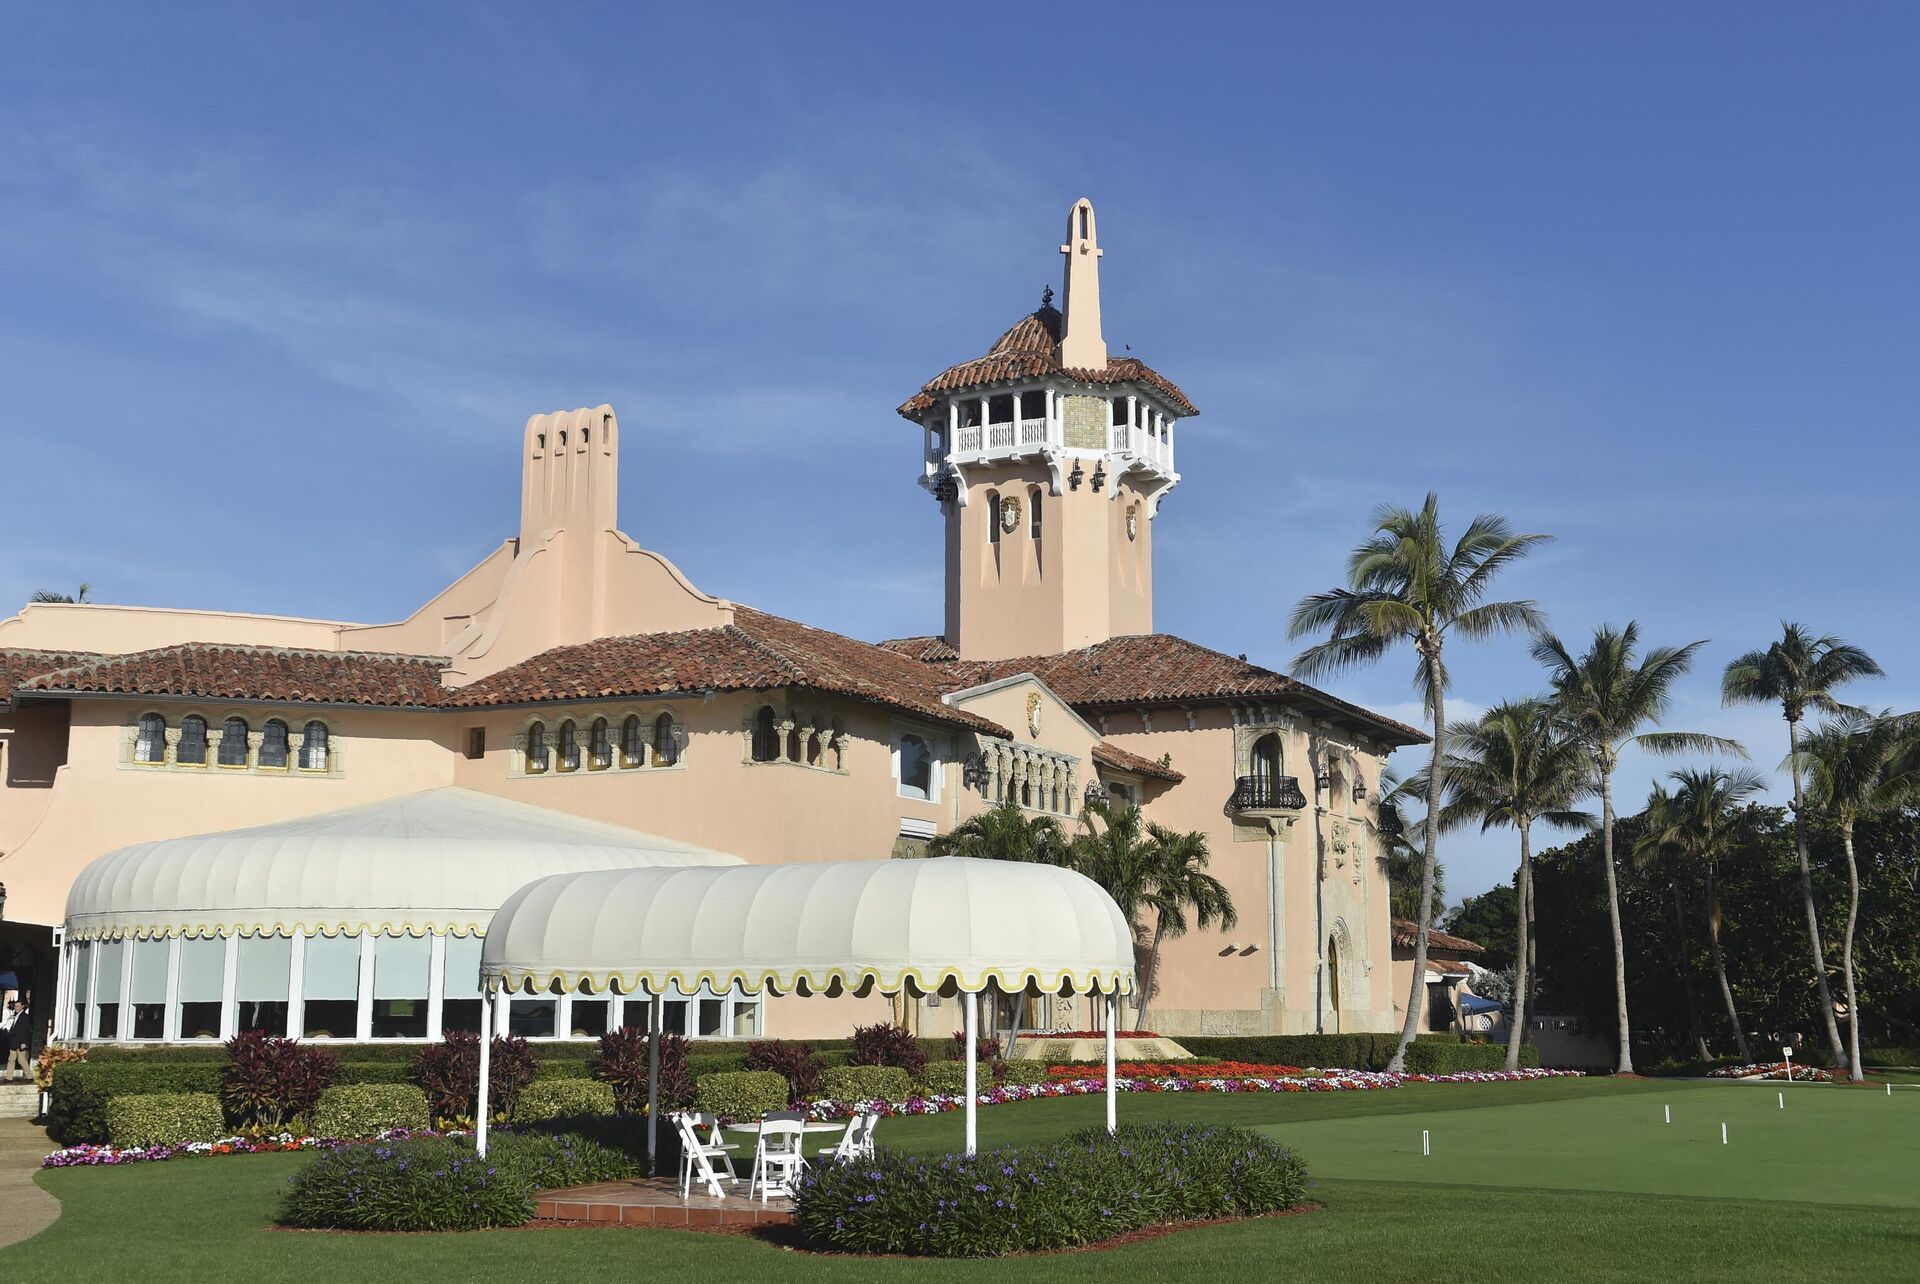 (FILES) In this file photo taken on December 24, 2017 a general view shows US President Donald J. Trump's Mar-a-Lago resort in Palm Beach, Florida - Sputnik International, 1920, 09.08.2022